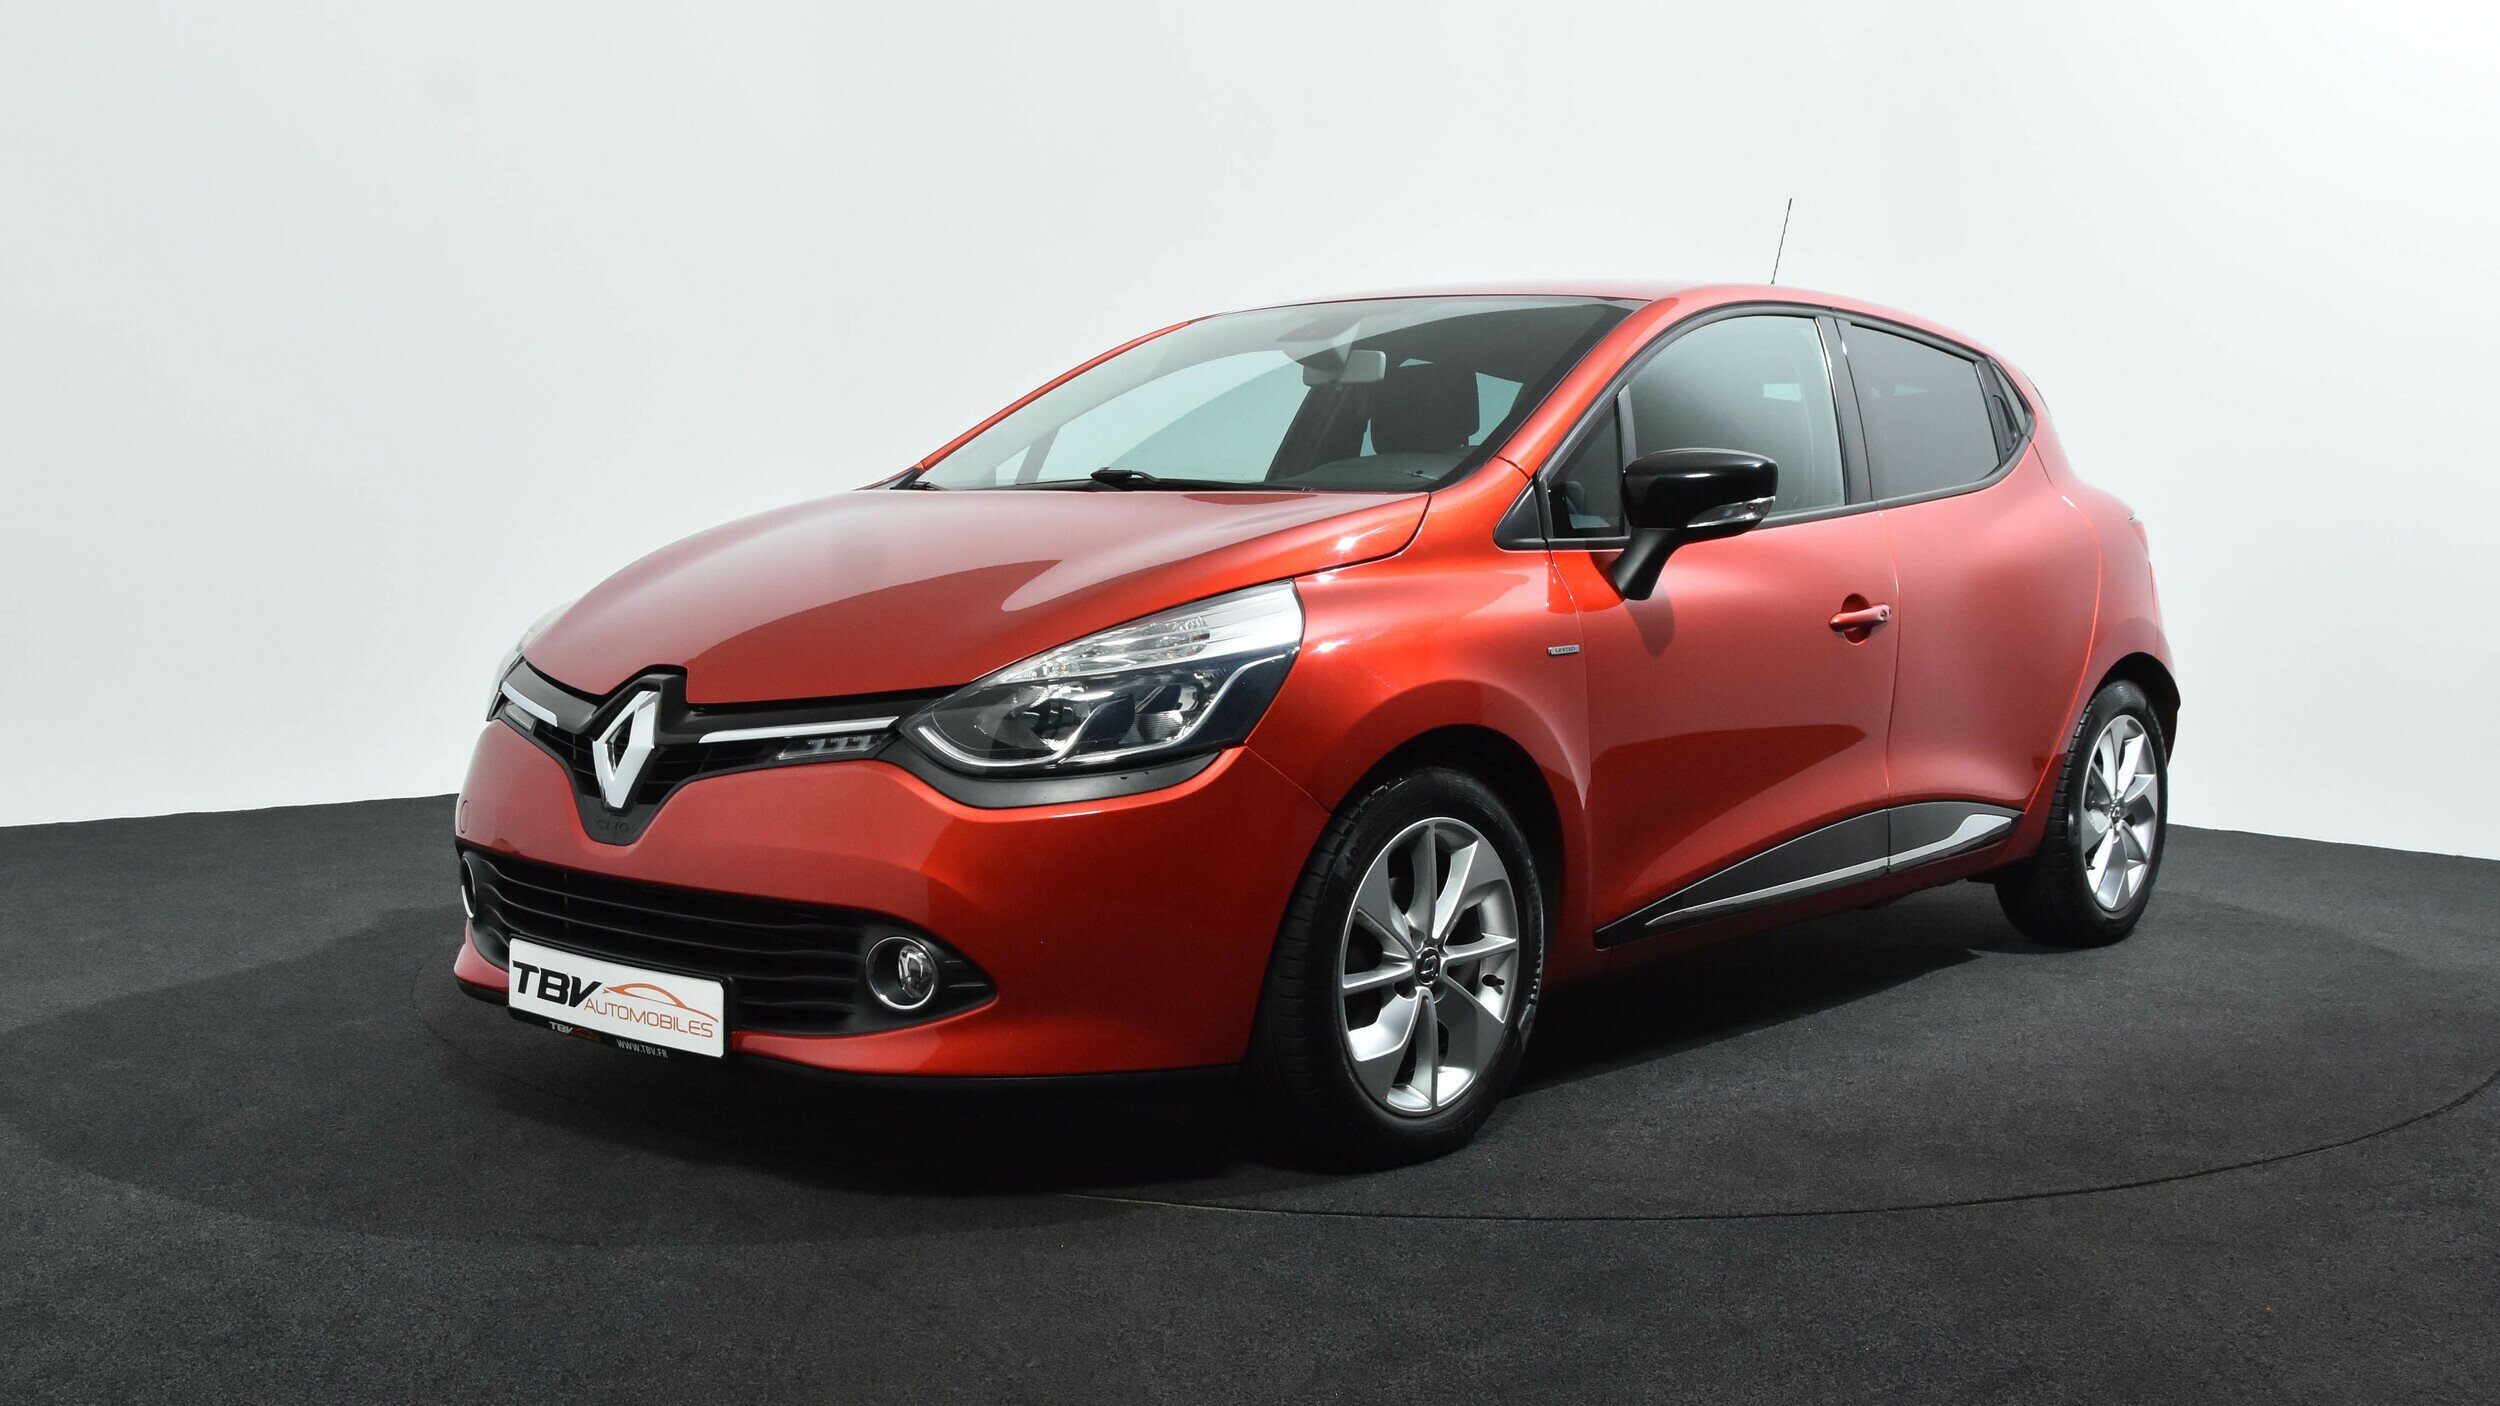 RENAULT Clio IV 0.9 TCE 90 CV TYPE LIMITED GPS BLUETOOTH